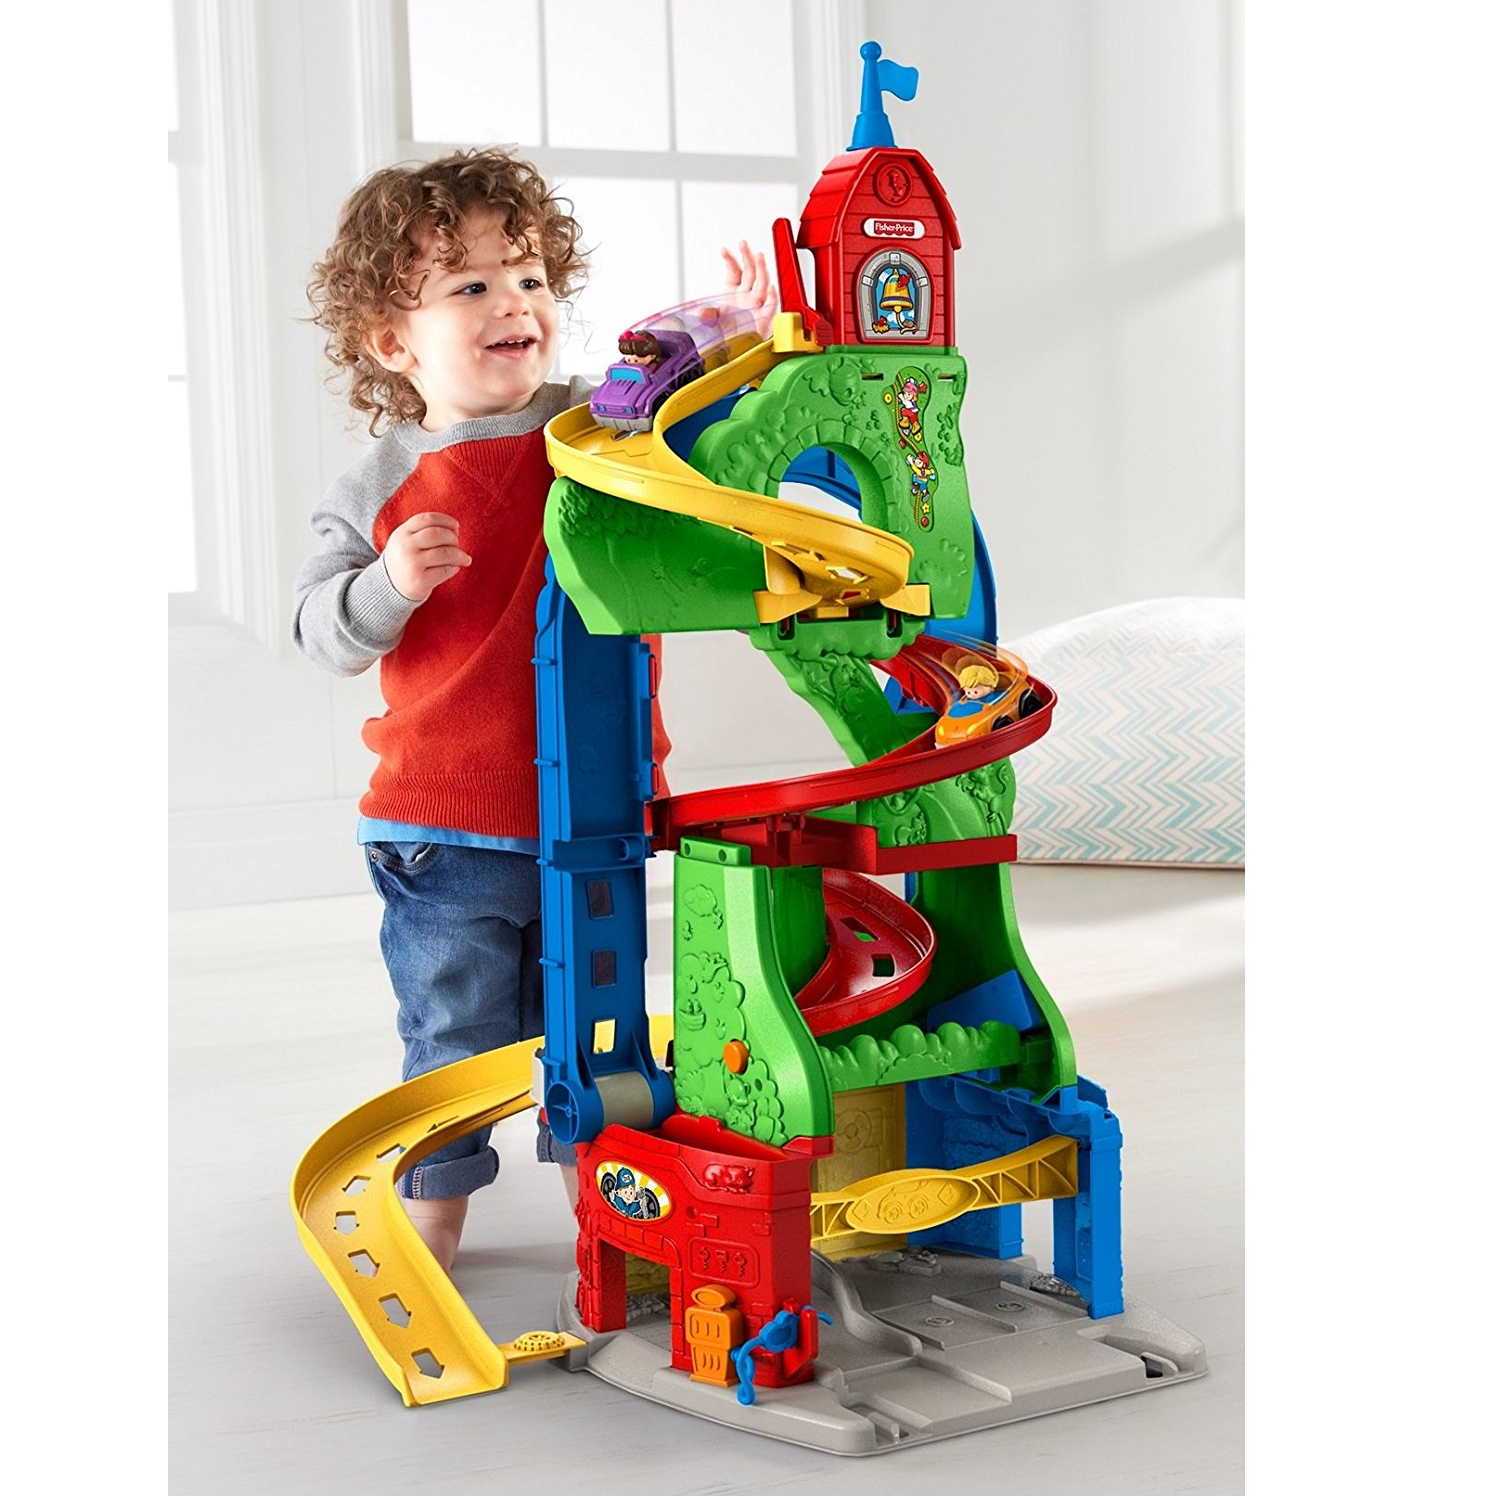 Fisher-Price Little People Sit ‘n Stand Skyway – Just $23.99 with Prime!